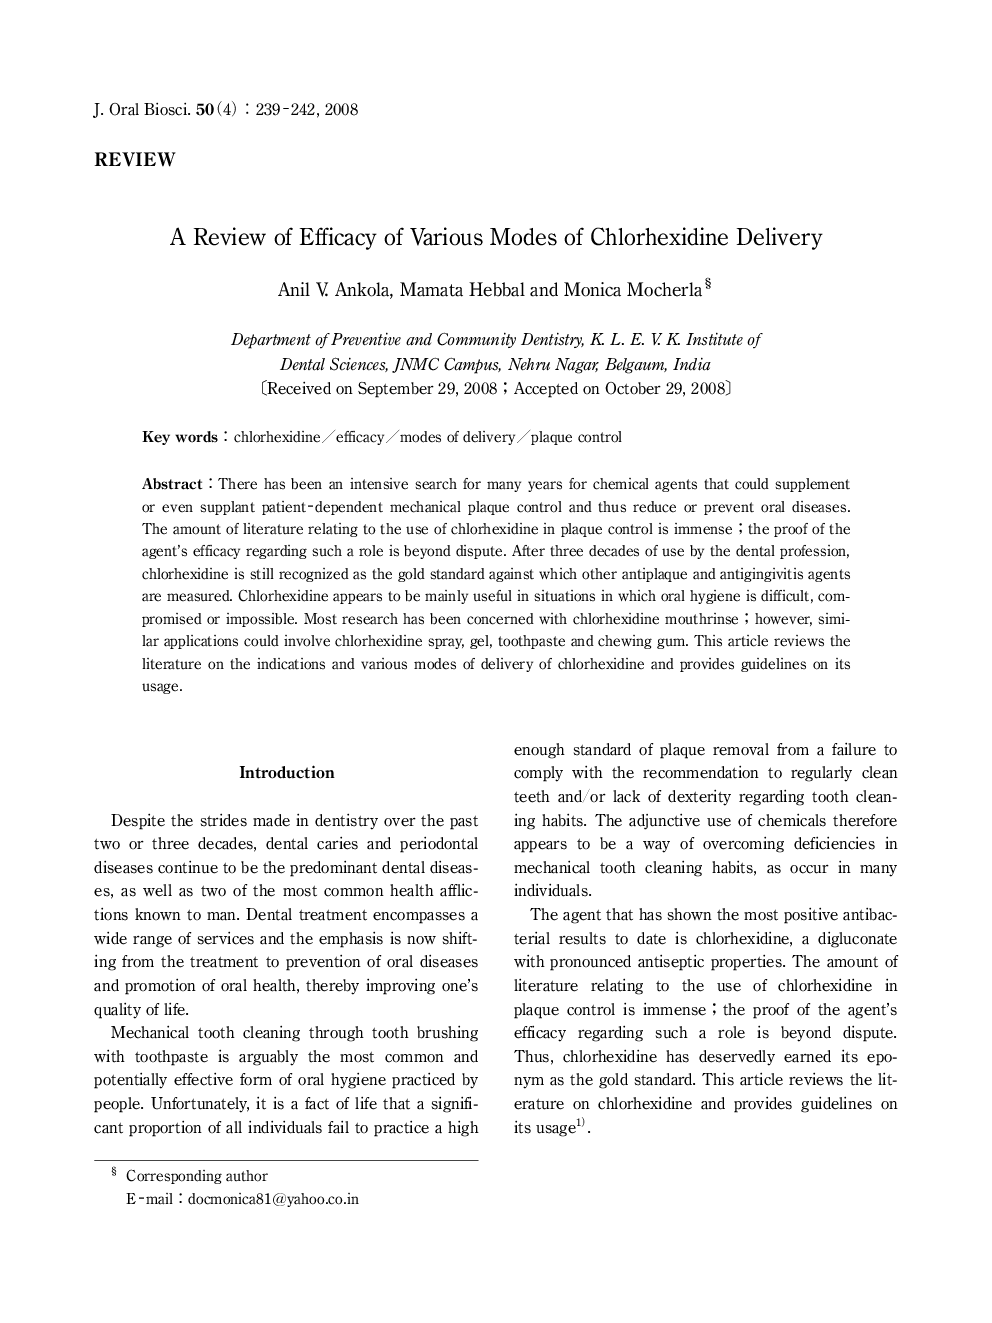 A Review of Efficacy of Various Modes of Chlorhexidine Delivery